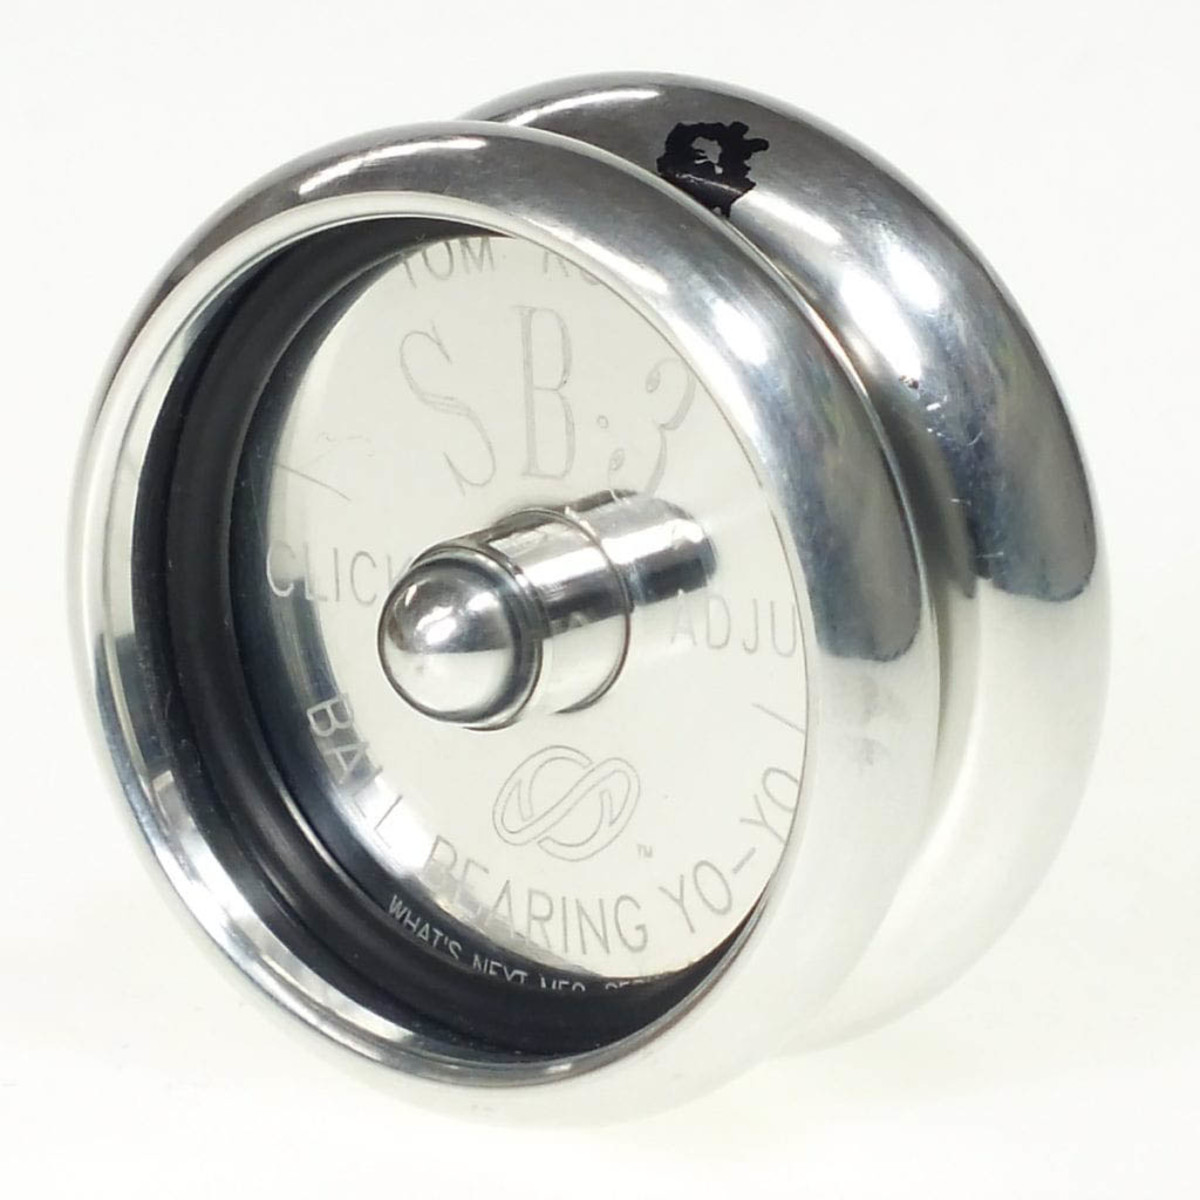 A Tom Kuhn Silver Bullet 3. Kuhn’s ball-bearing Silver Bullet models, which came out in 1984, were the first yo-yos to feature a full-metal body machined out of aircraft-grade aluminum.